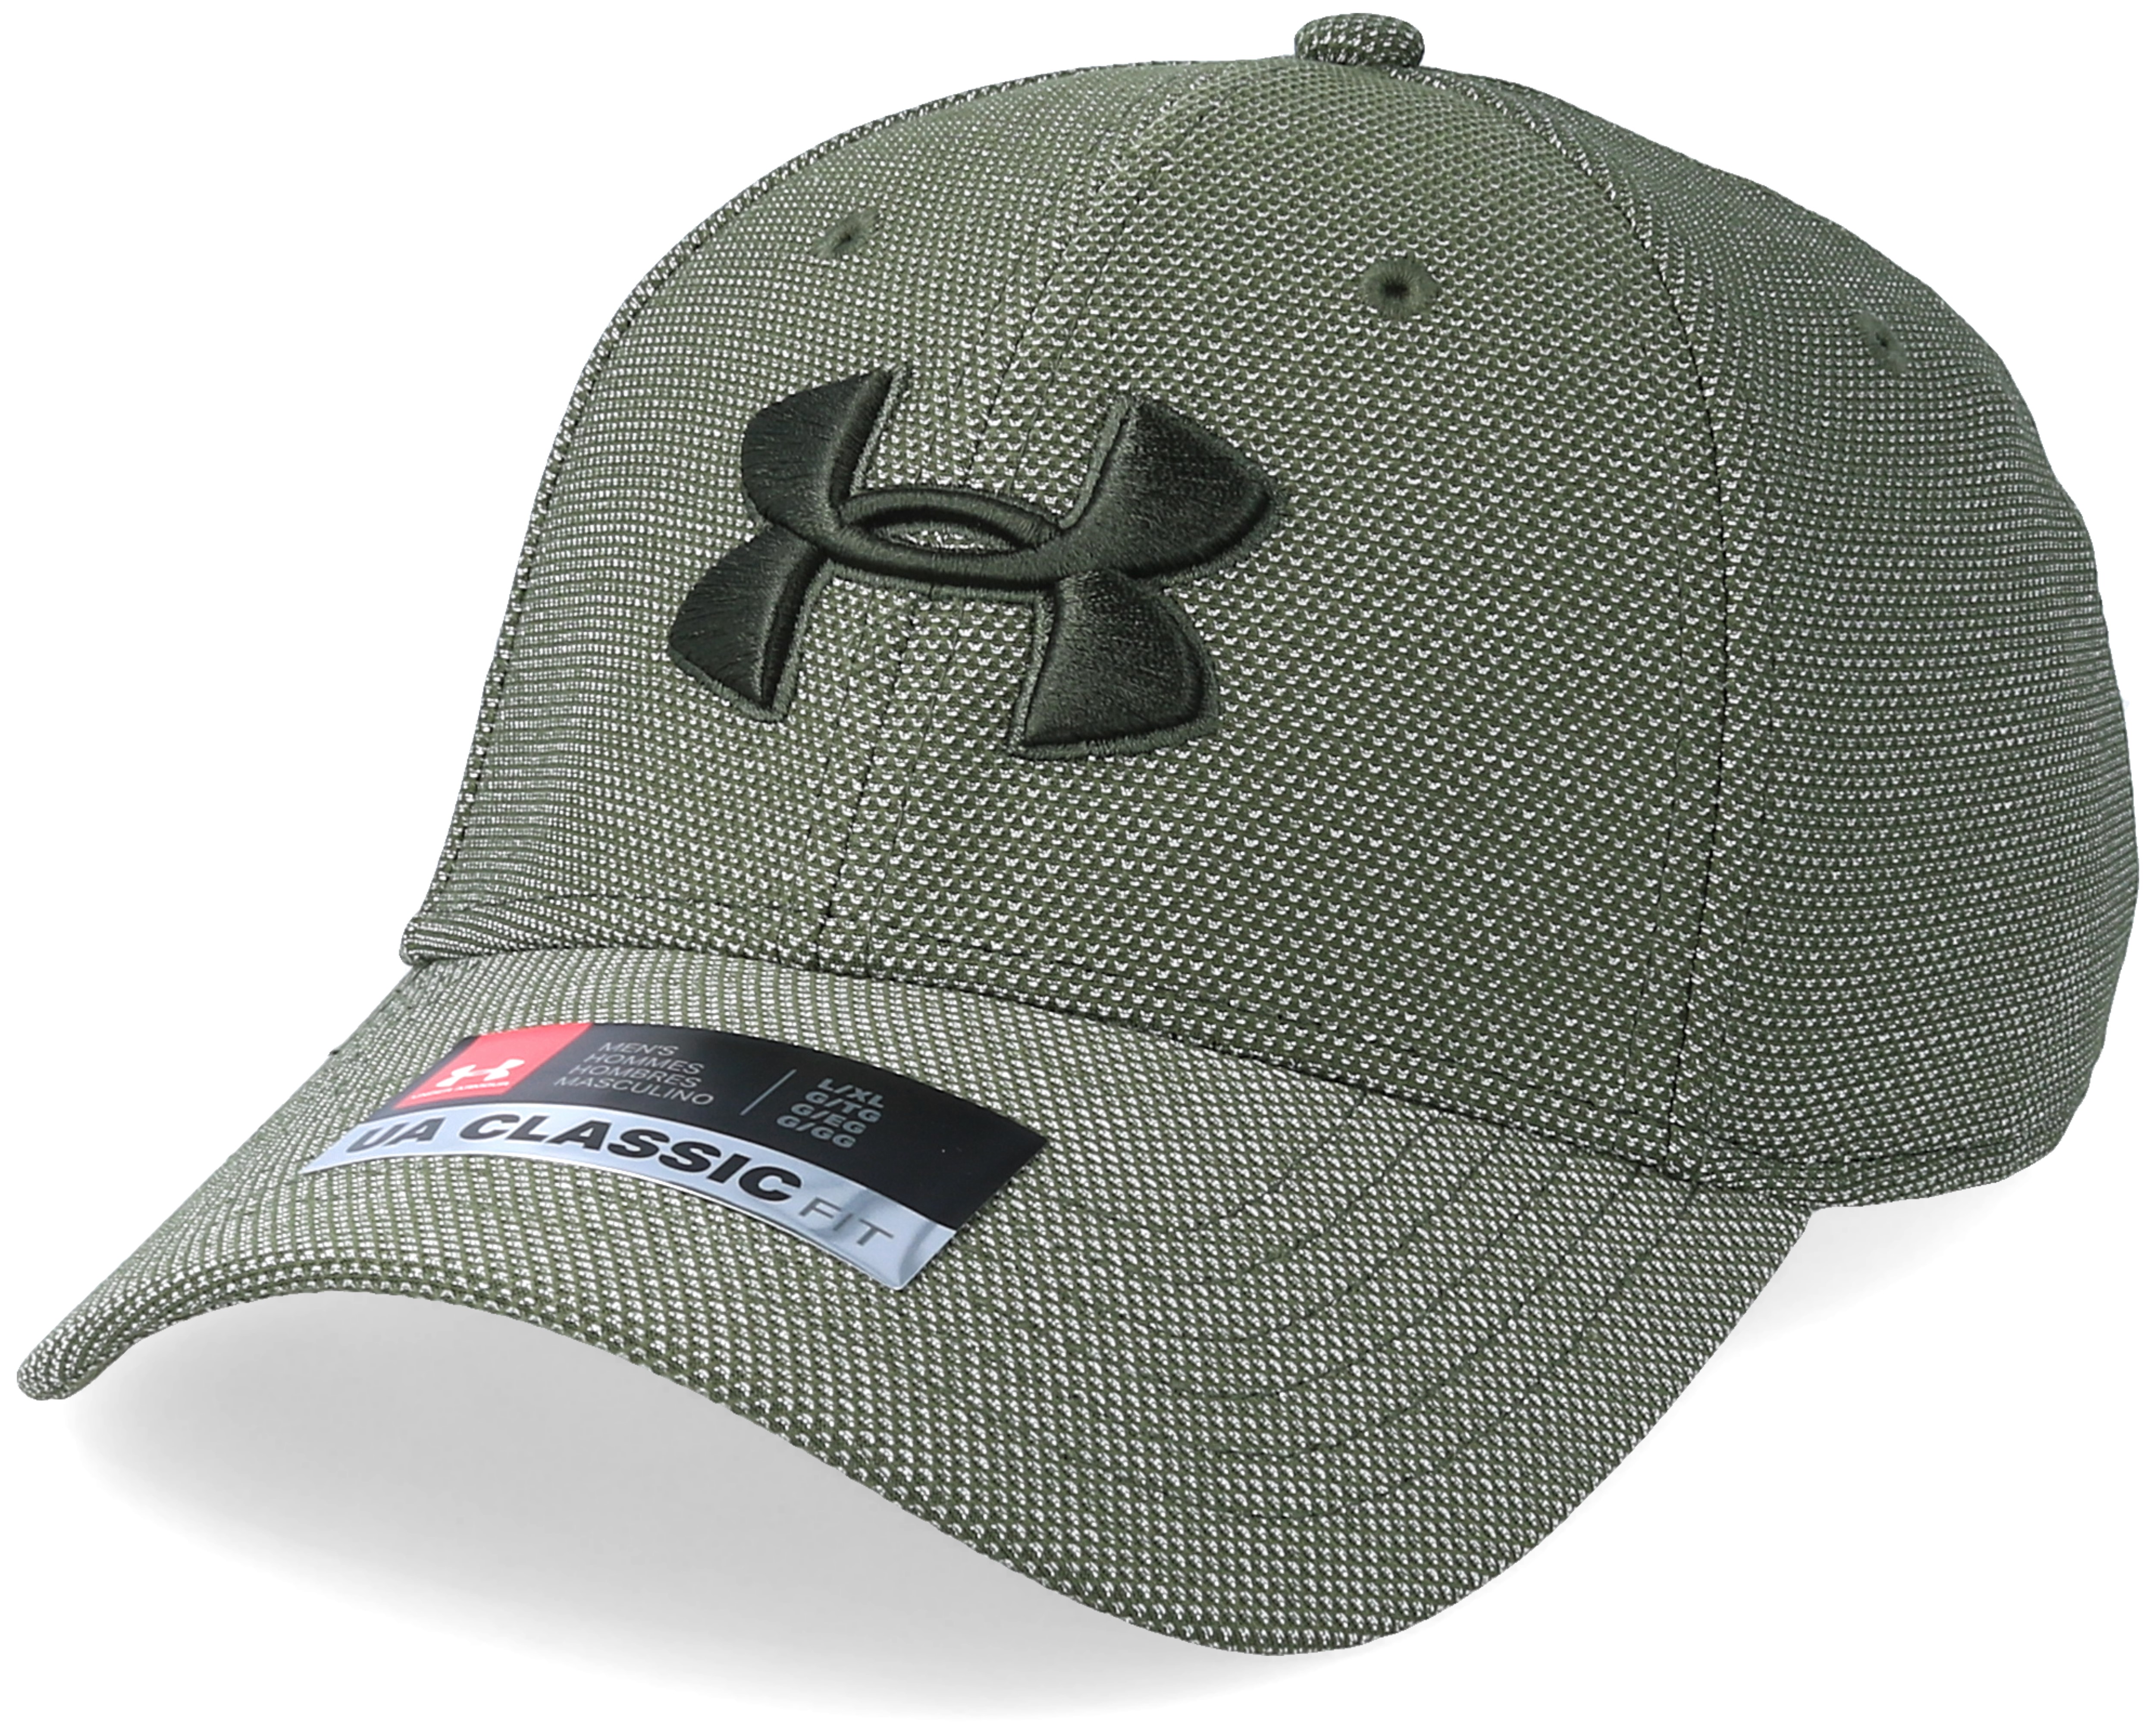 Heathered Blitzing 3.0 Downtown Green Flexfit - Under Armour caps ...